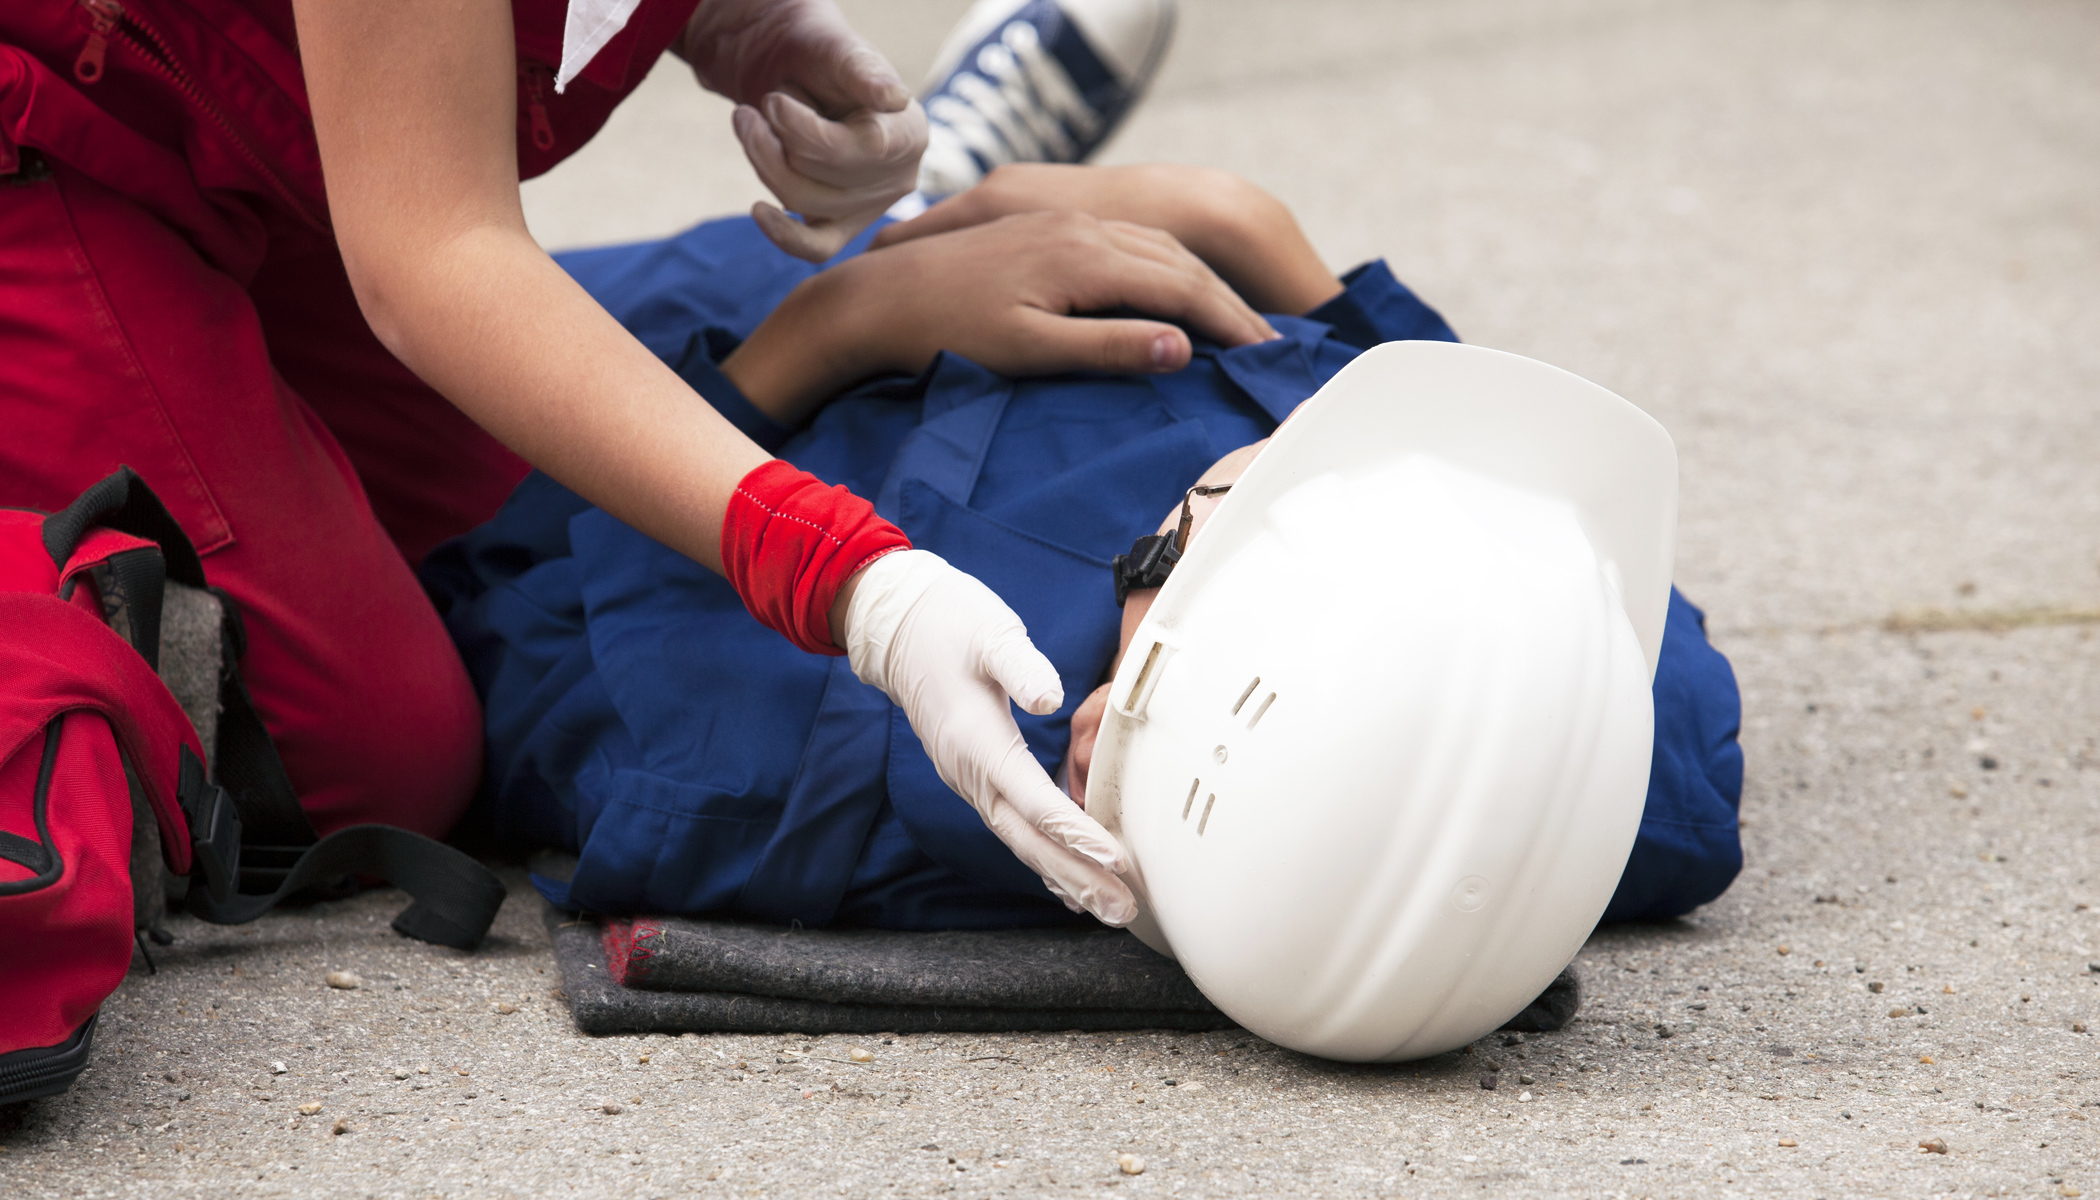 Certified Rescue Courses, North Dartmouth MA, low cost CPR classes, affordable on-site CPR training courses, MA, RI, CT